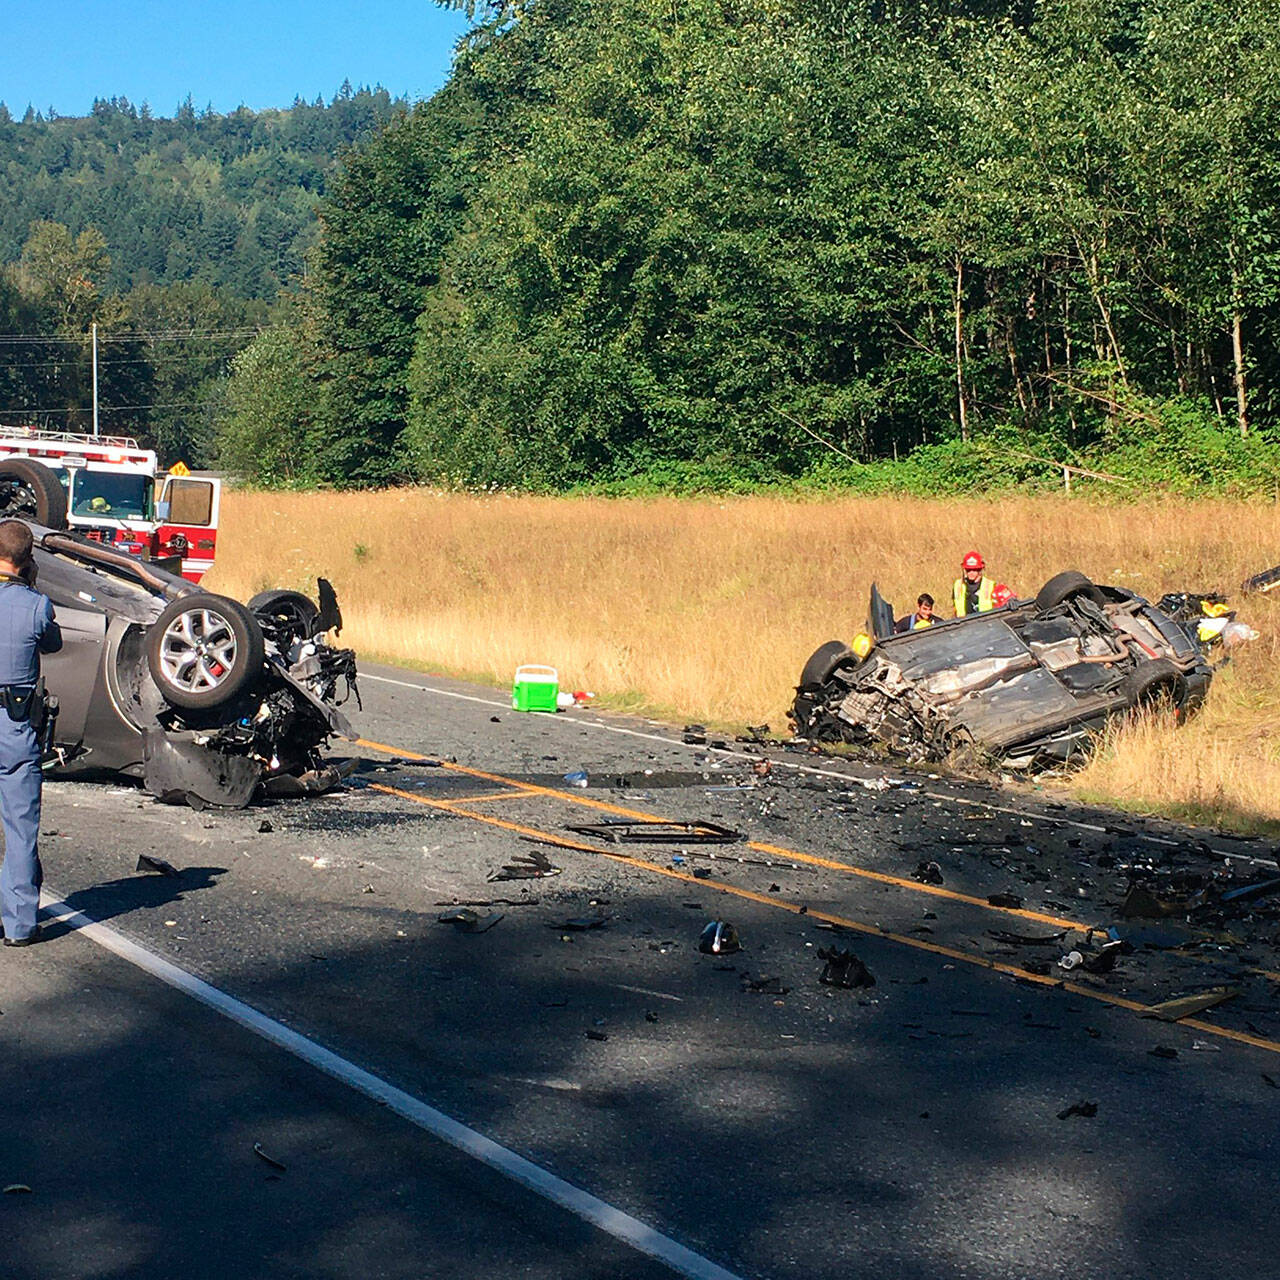 Two vehicles rolled over on Aug. 15, 2020, on Highway 522. (Snohomish County Fire District 7)